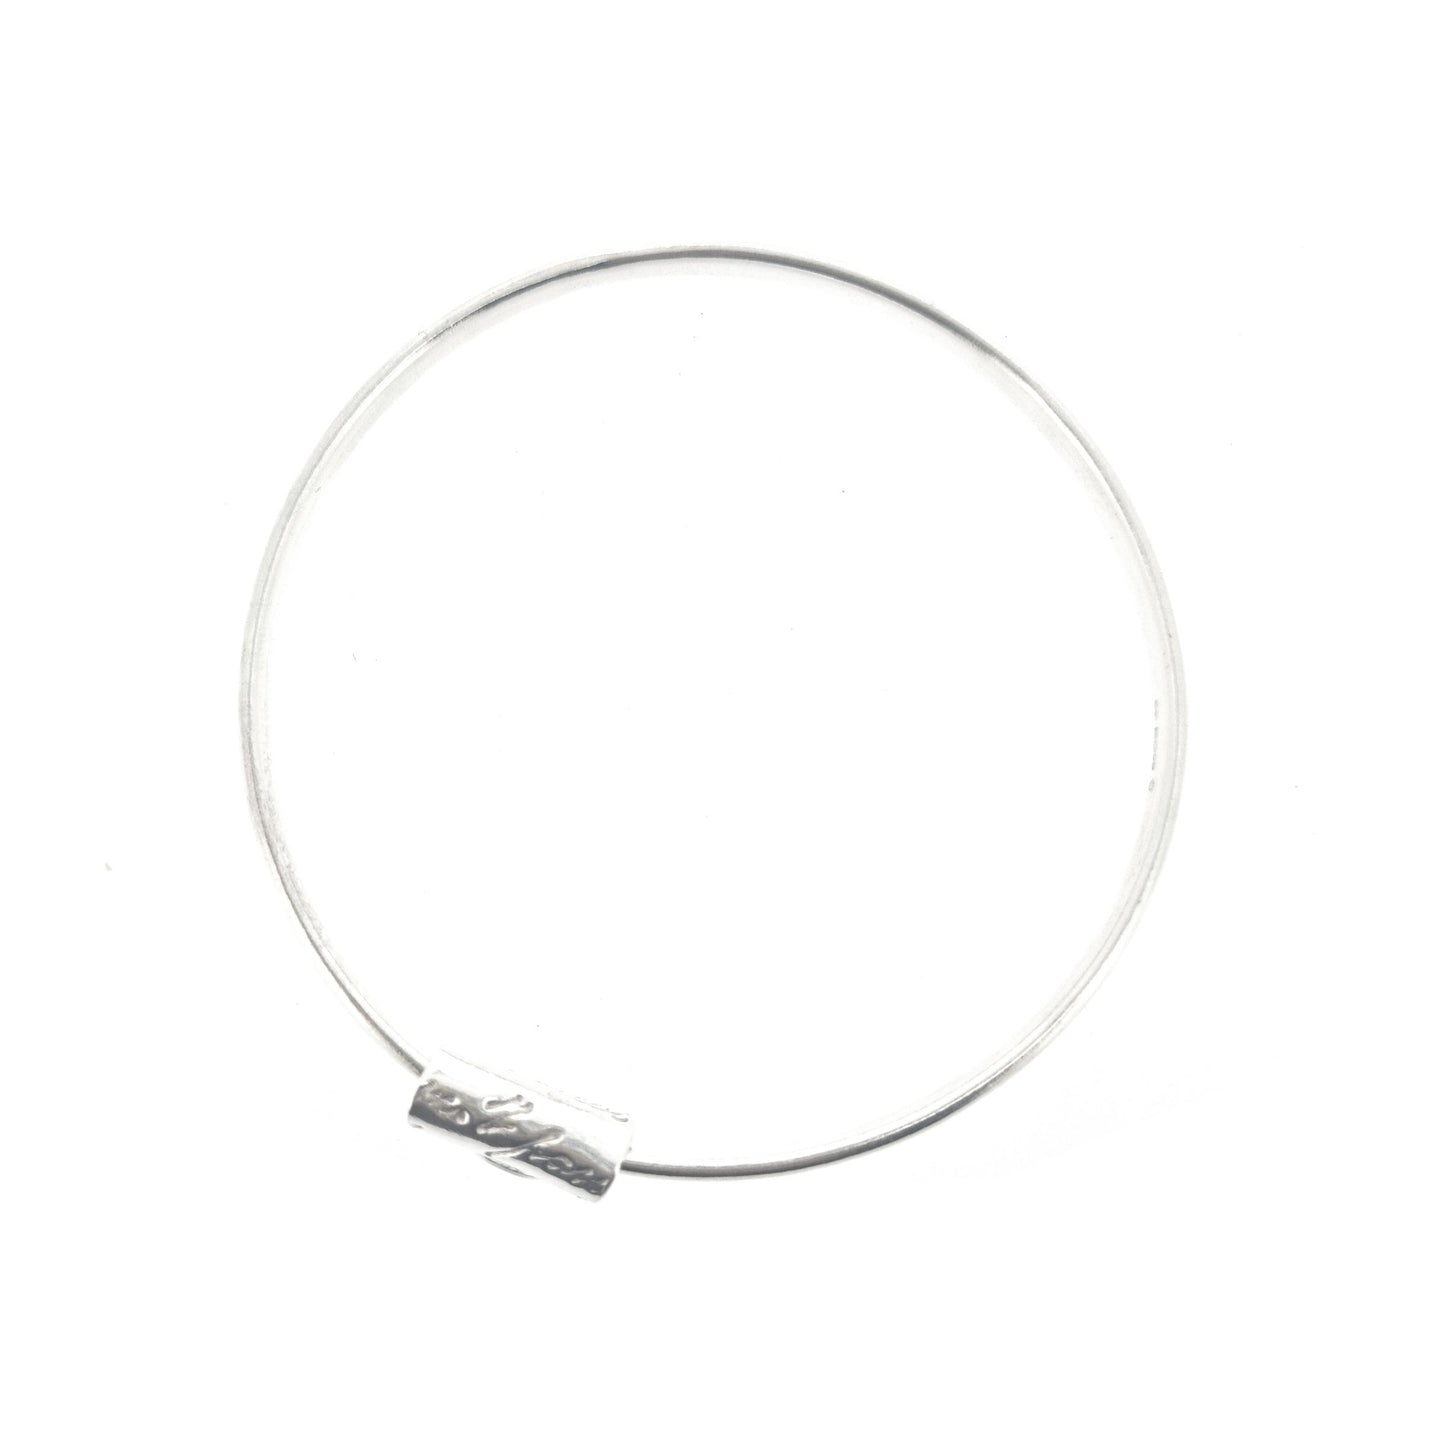 A round silver bangle with an oval profile and a bead with script writing on.